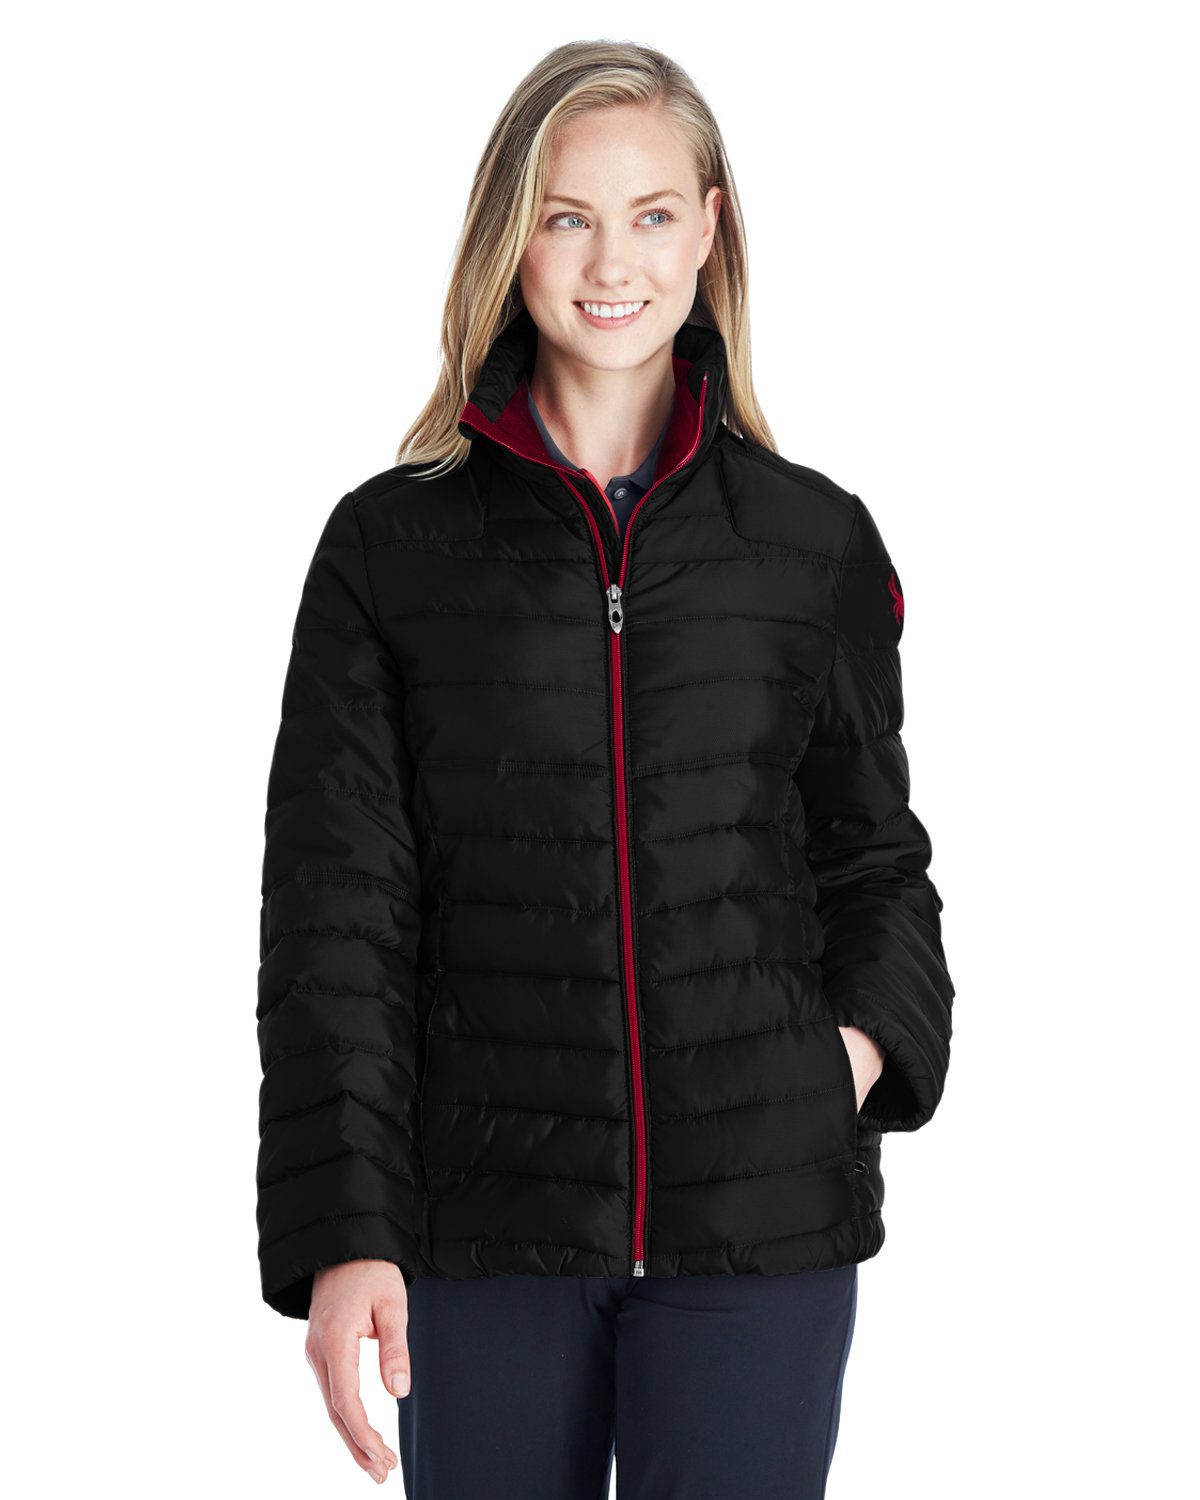 Spyder Ladies' Supreme Insulated Puffer Jacket #187336 Black / Red